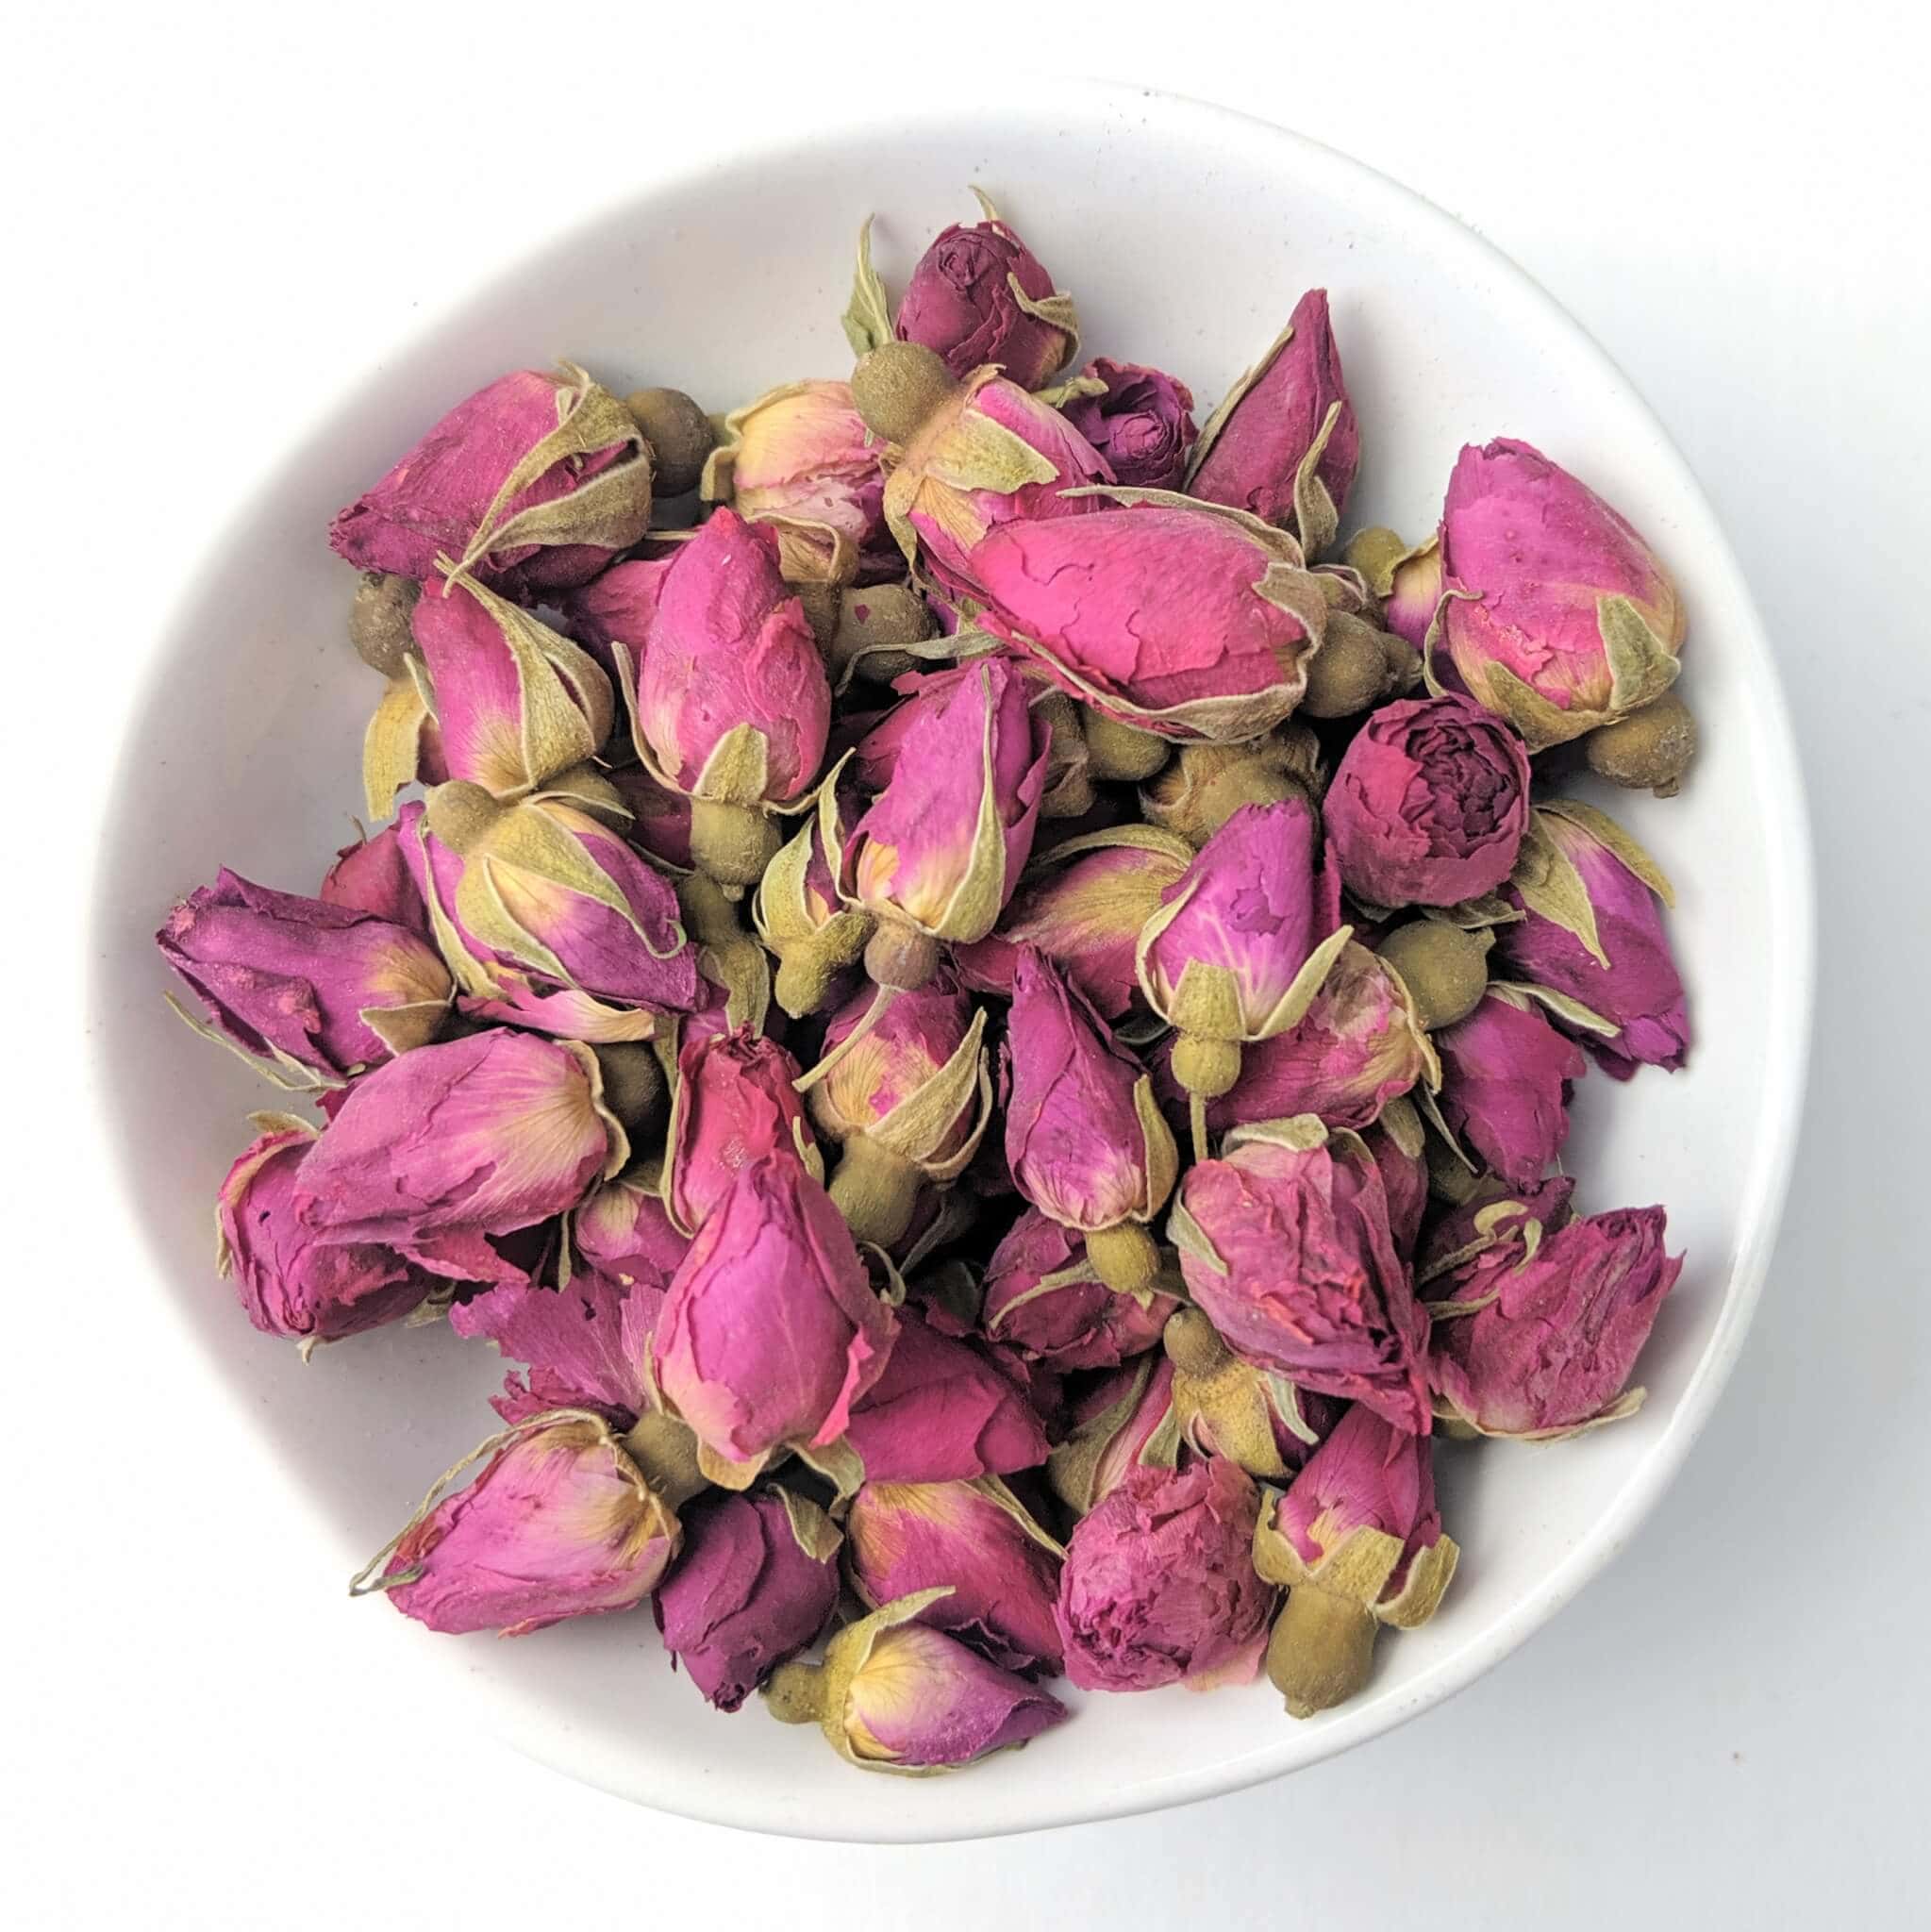 Organic Red Rose Buds in a White Bowl Top View